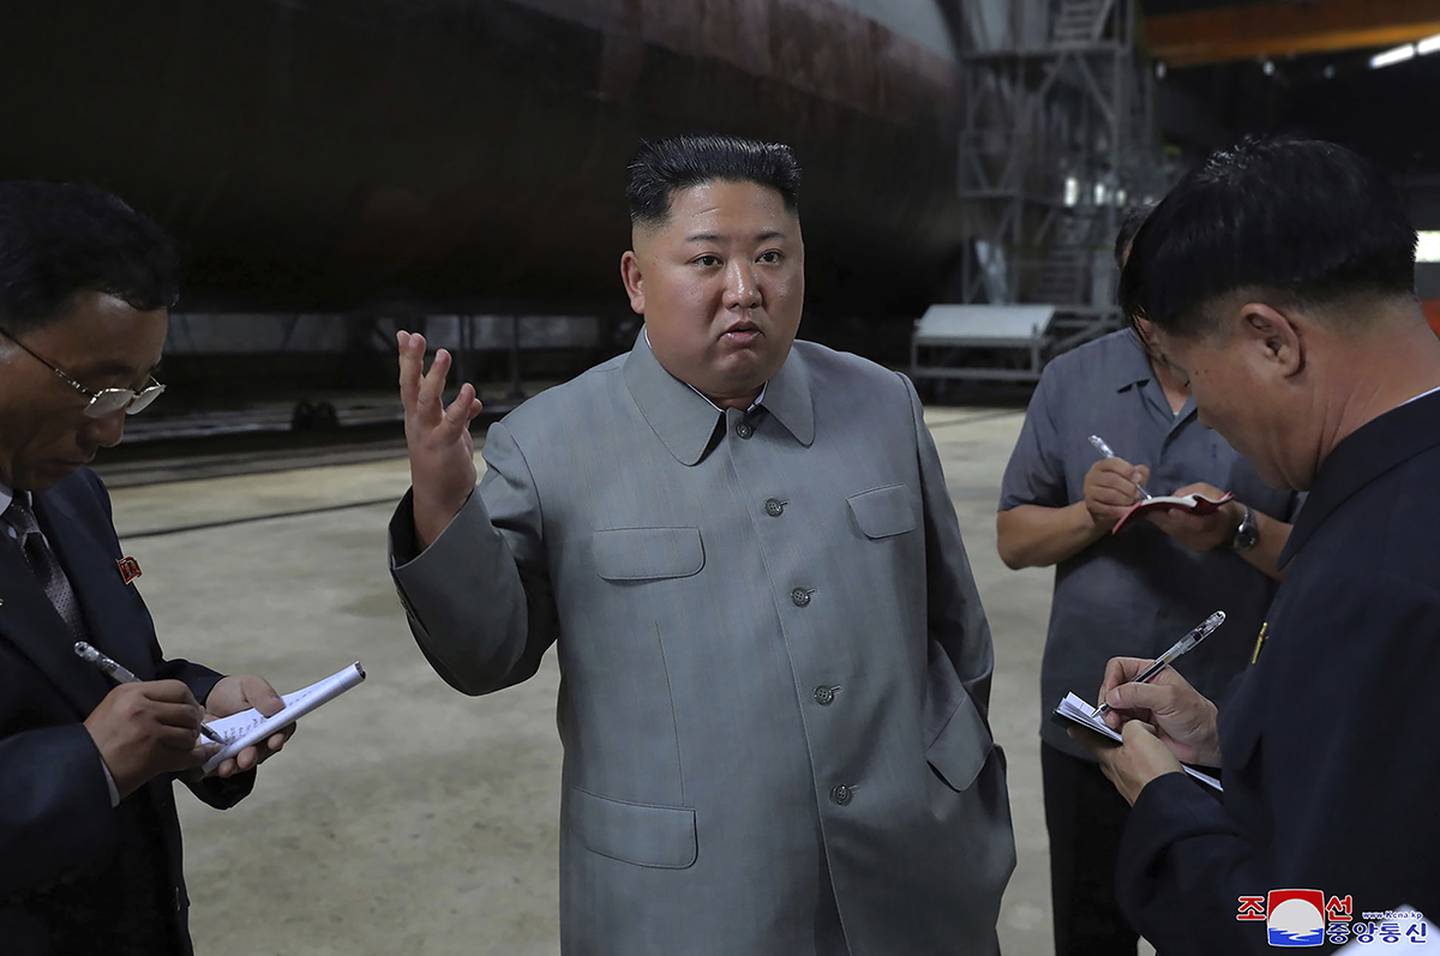 In this undated photo provided on Tuesday, July 23, 2019, North Korean leader Kim Jong Un, center, speaks while inspecting a newly built submarine to be deployed soon, at an unknown location in North Korea.